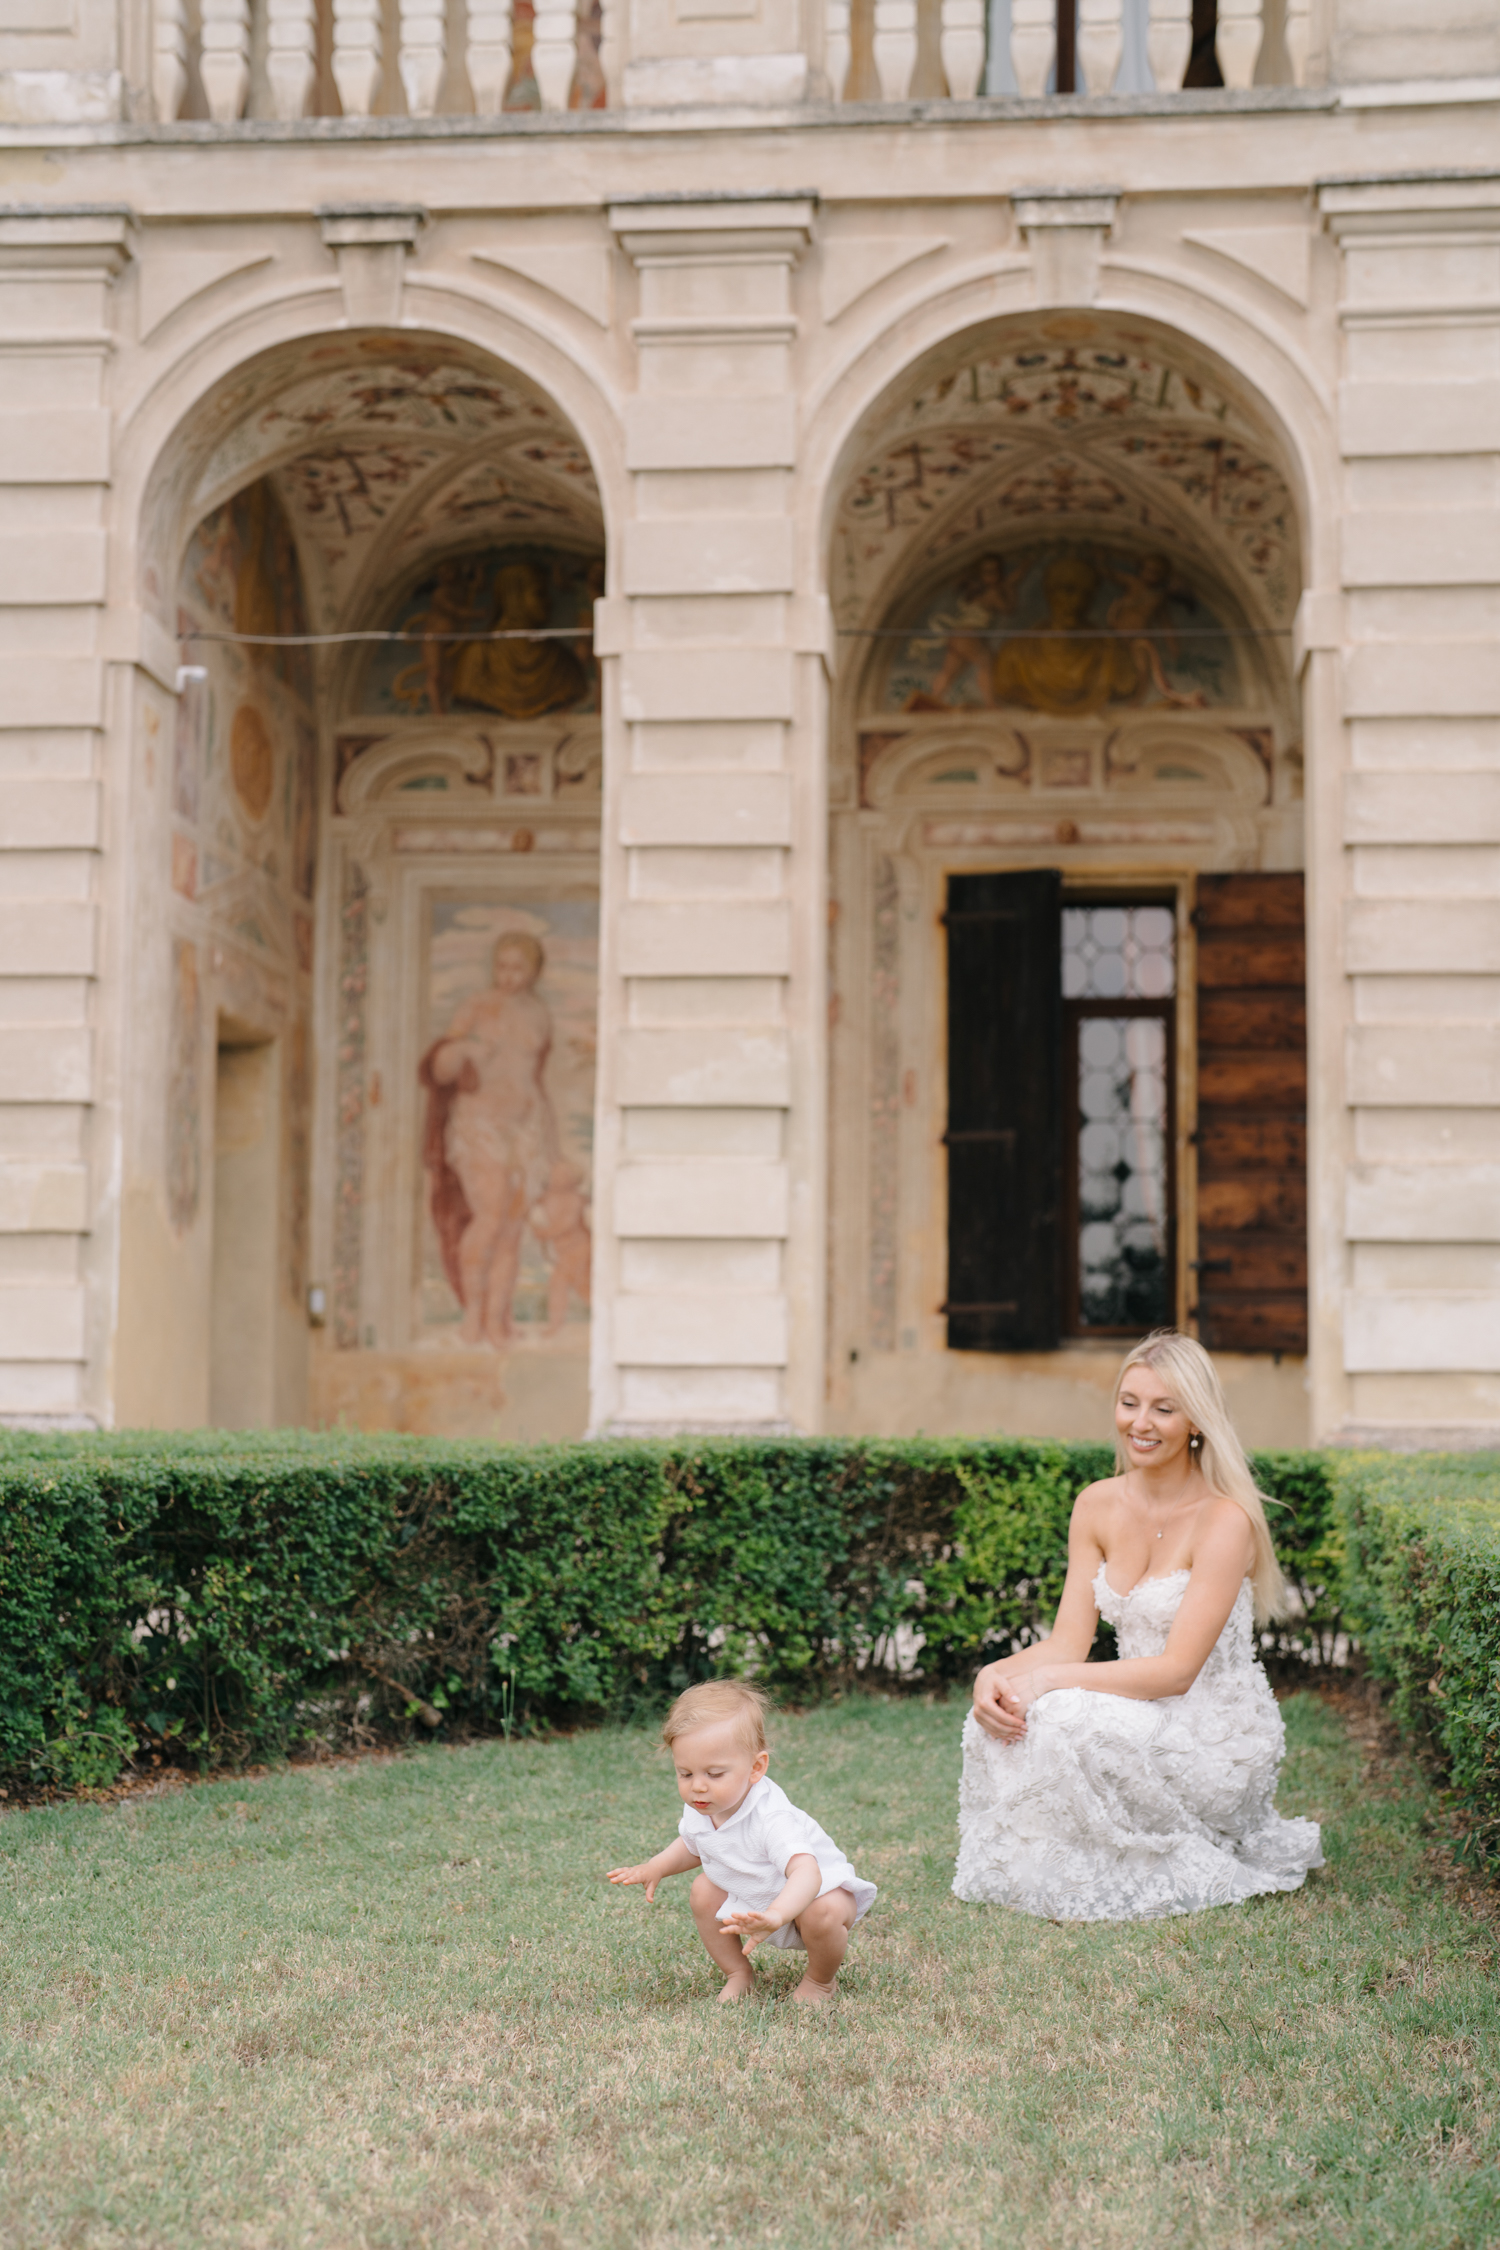 Alina Indi is a fine art wedding and family fine art and editorial photographer based in Venice, Italy